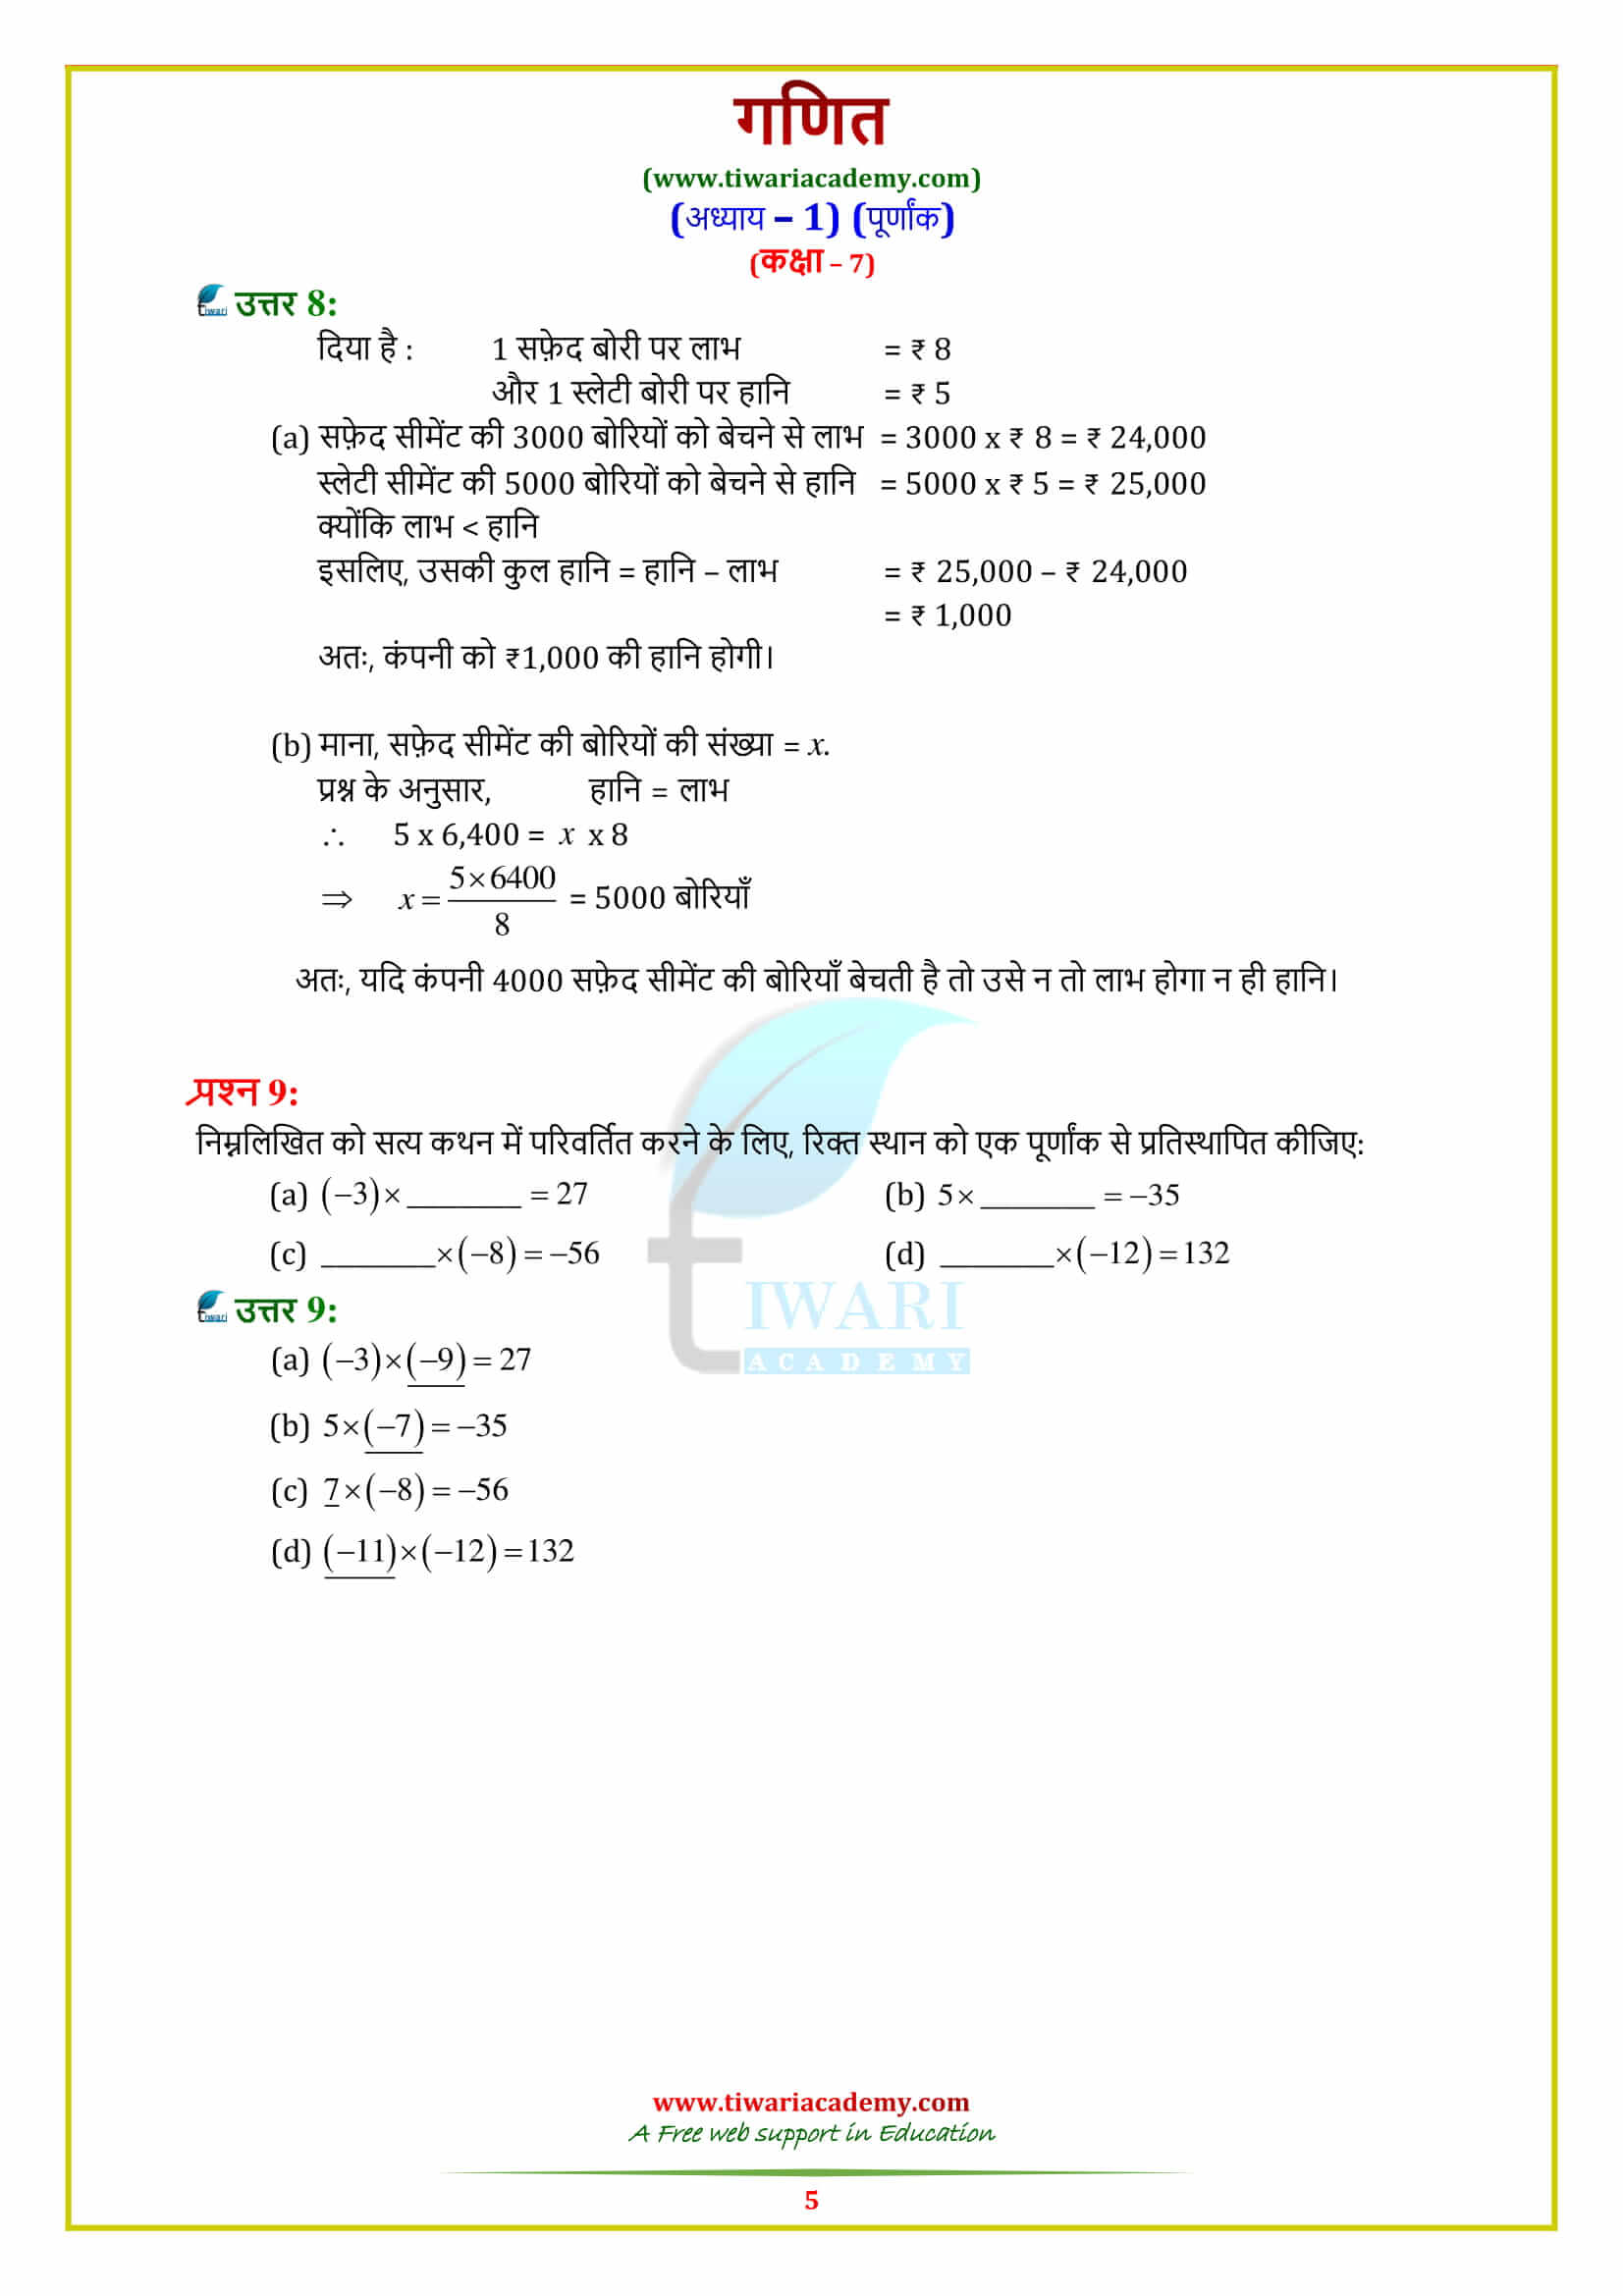 7 Maths Exercise 1.3 solutions for up and mp board